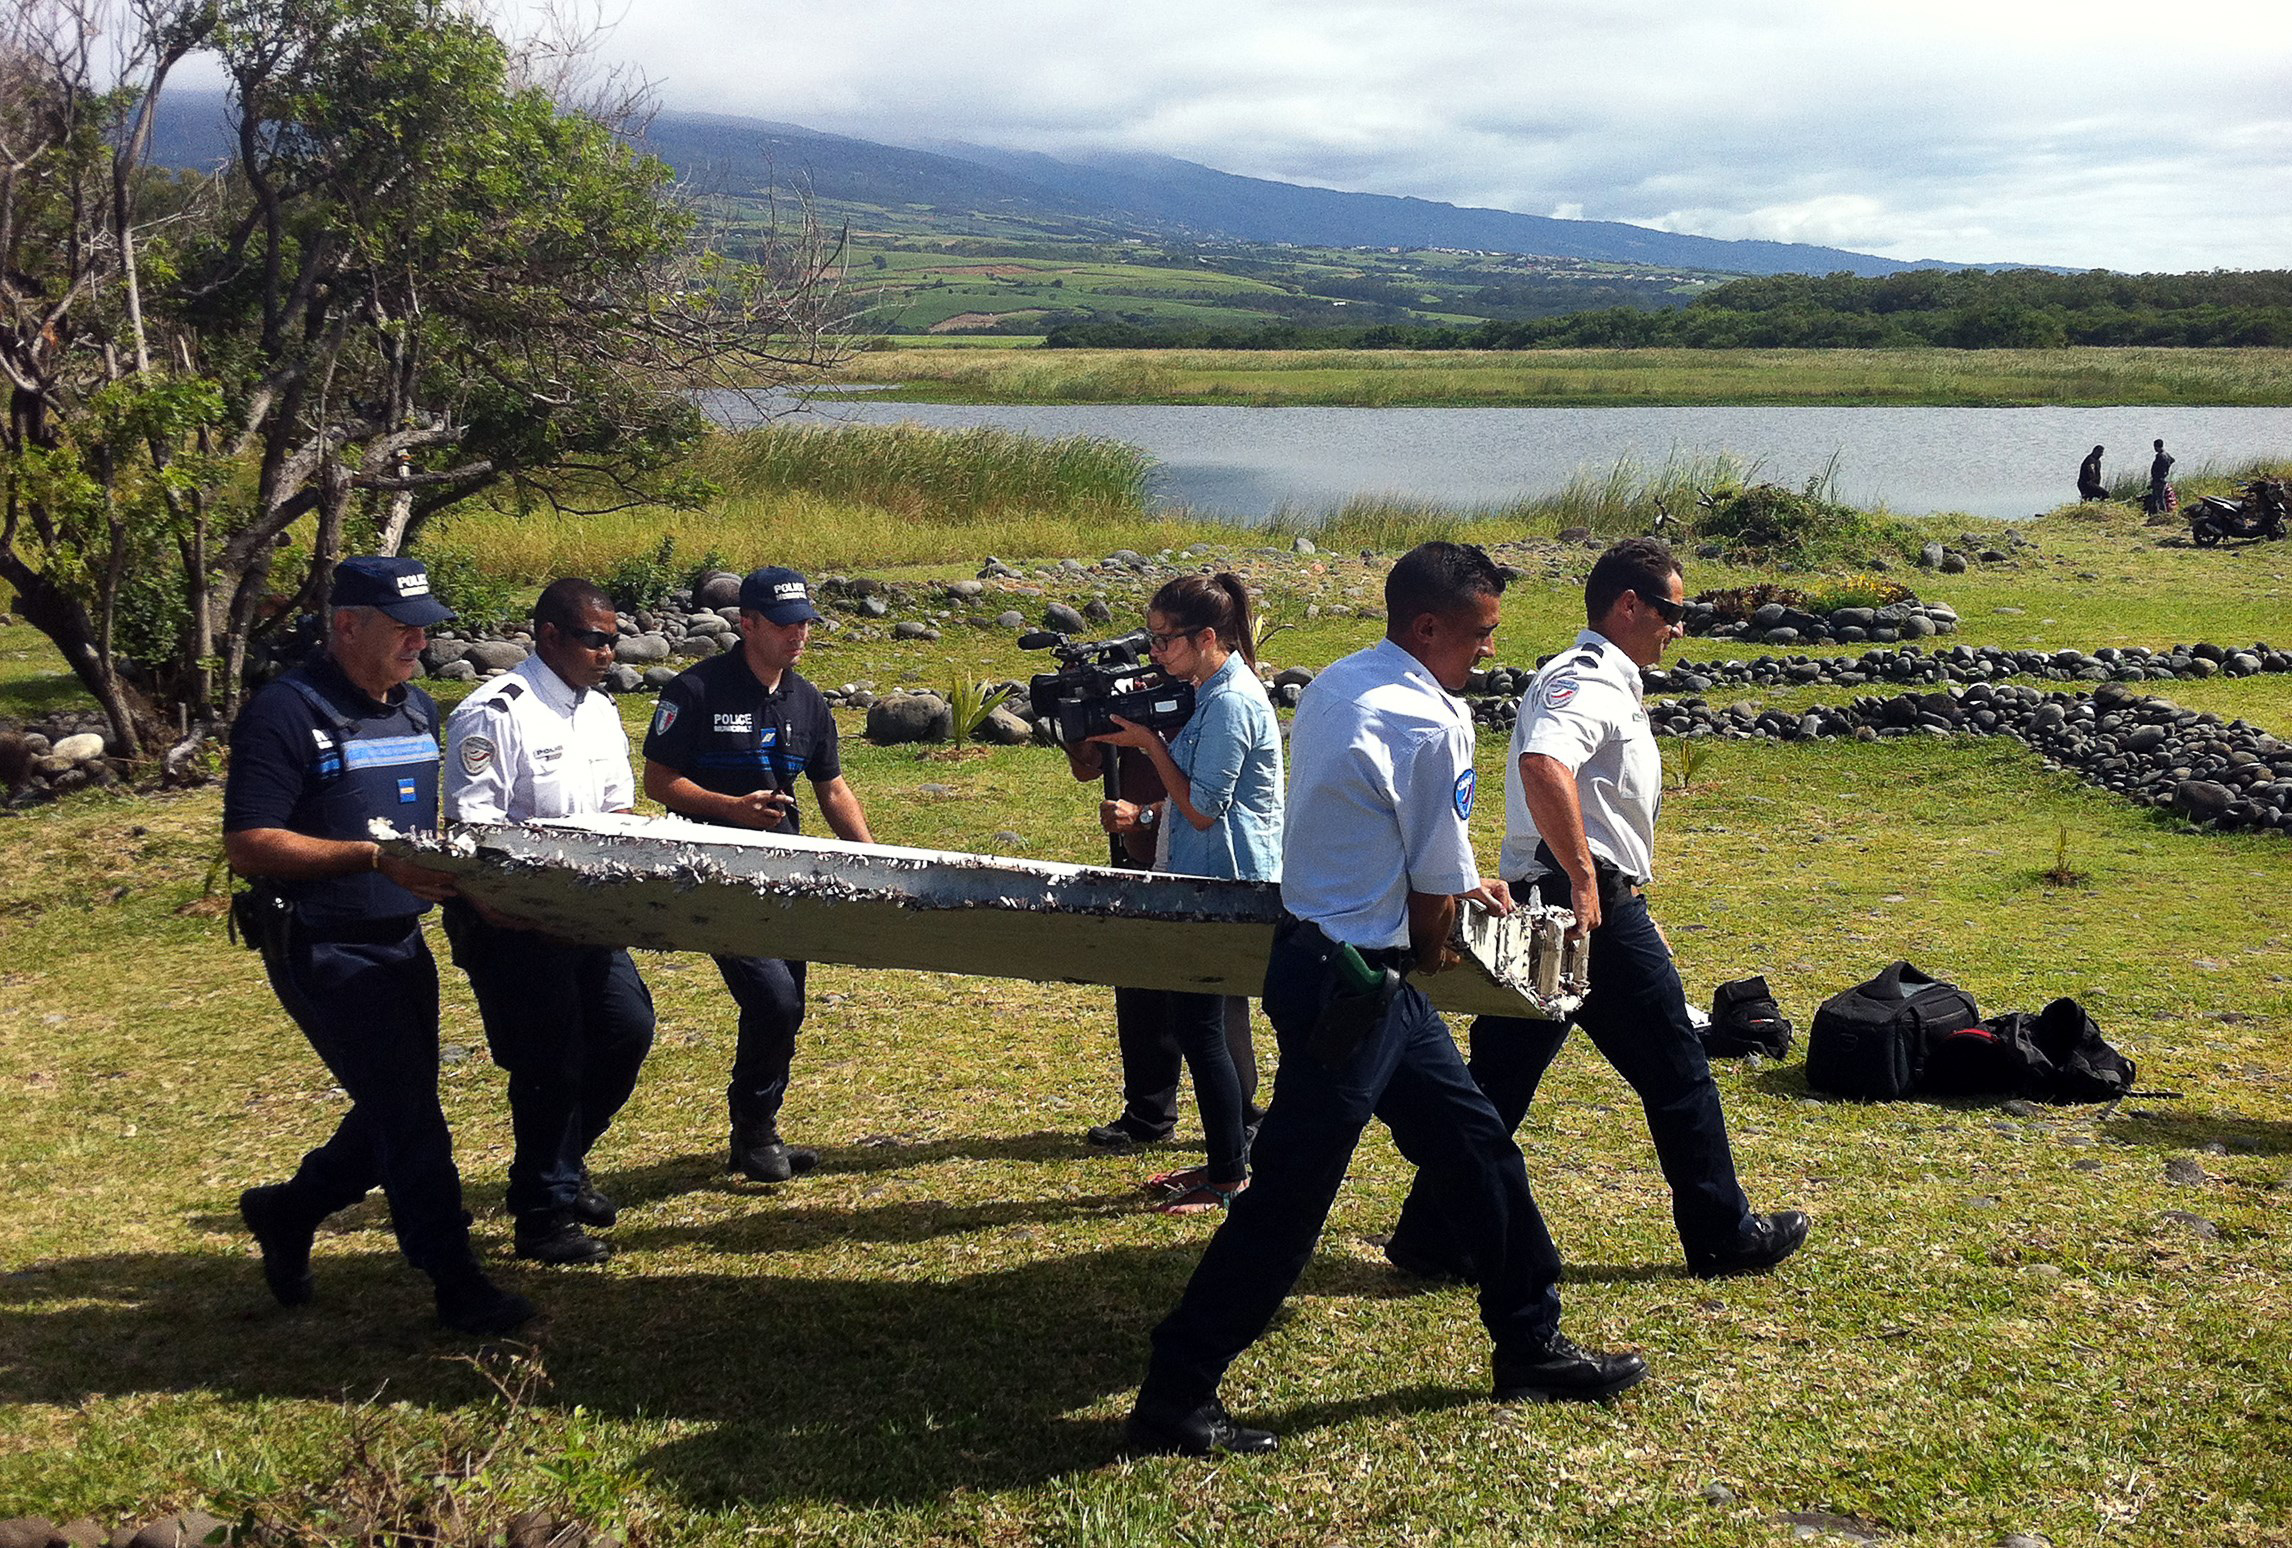 Police carry a piece of debris from an unidentified aircraft found in the coastal area of Saint-Andre de la Reunion, in the east of the French Indian Ocean island of La Reunion, on July 29, 2015.  The two-metre-long debris, which appears to be a piece of a wing, was found by employees of an association cleaning the area and handed over to the air transport brigade of the French gendarmerie (BGTA), who have opened an investigation. An air safety expert did not exclude it could be a part of the Malaysia Airlines flight MH370, which went missing in the Indian Ocean on March 8, 2014. AFP PHOTO / YANNICK PITOU        (Photo credit should read YANNICK PITOU/AFP/Getty Images)